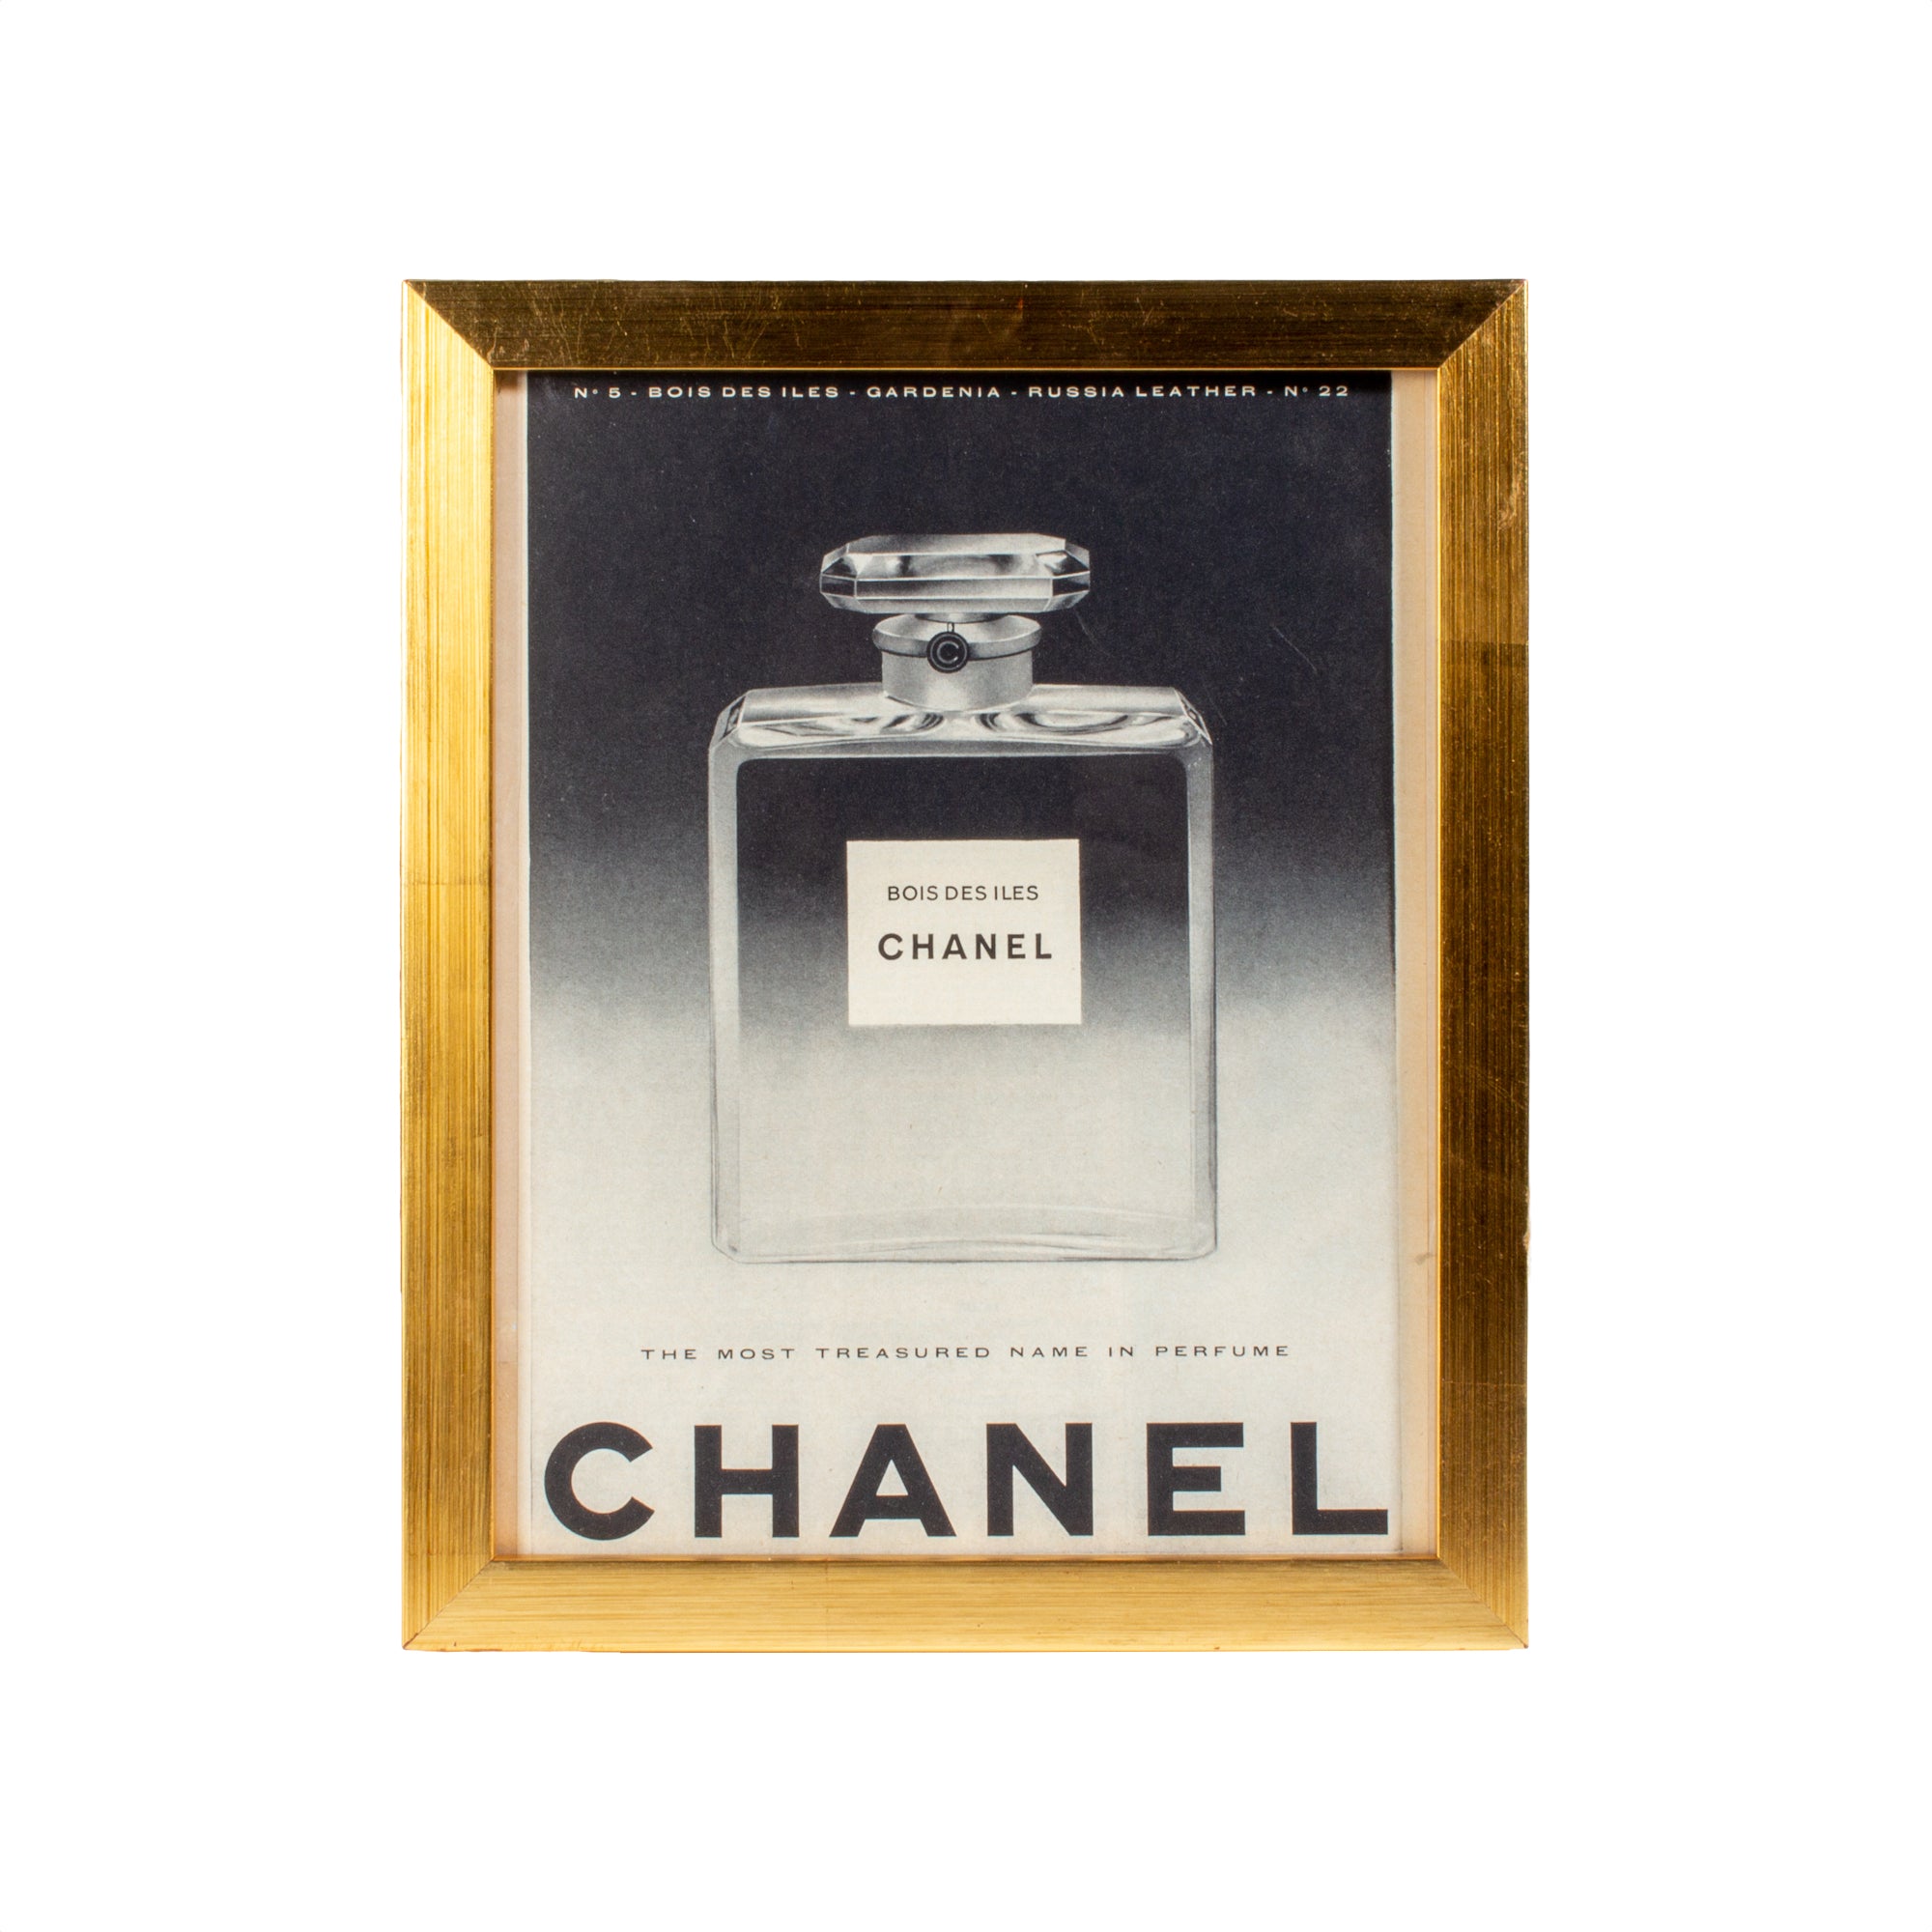 Vintage French Chanel Perfume Advertisement – Laurier Blanc